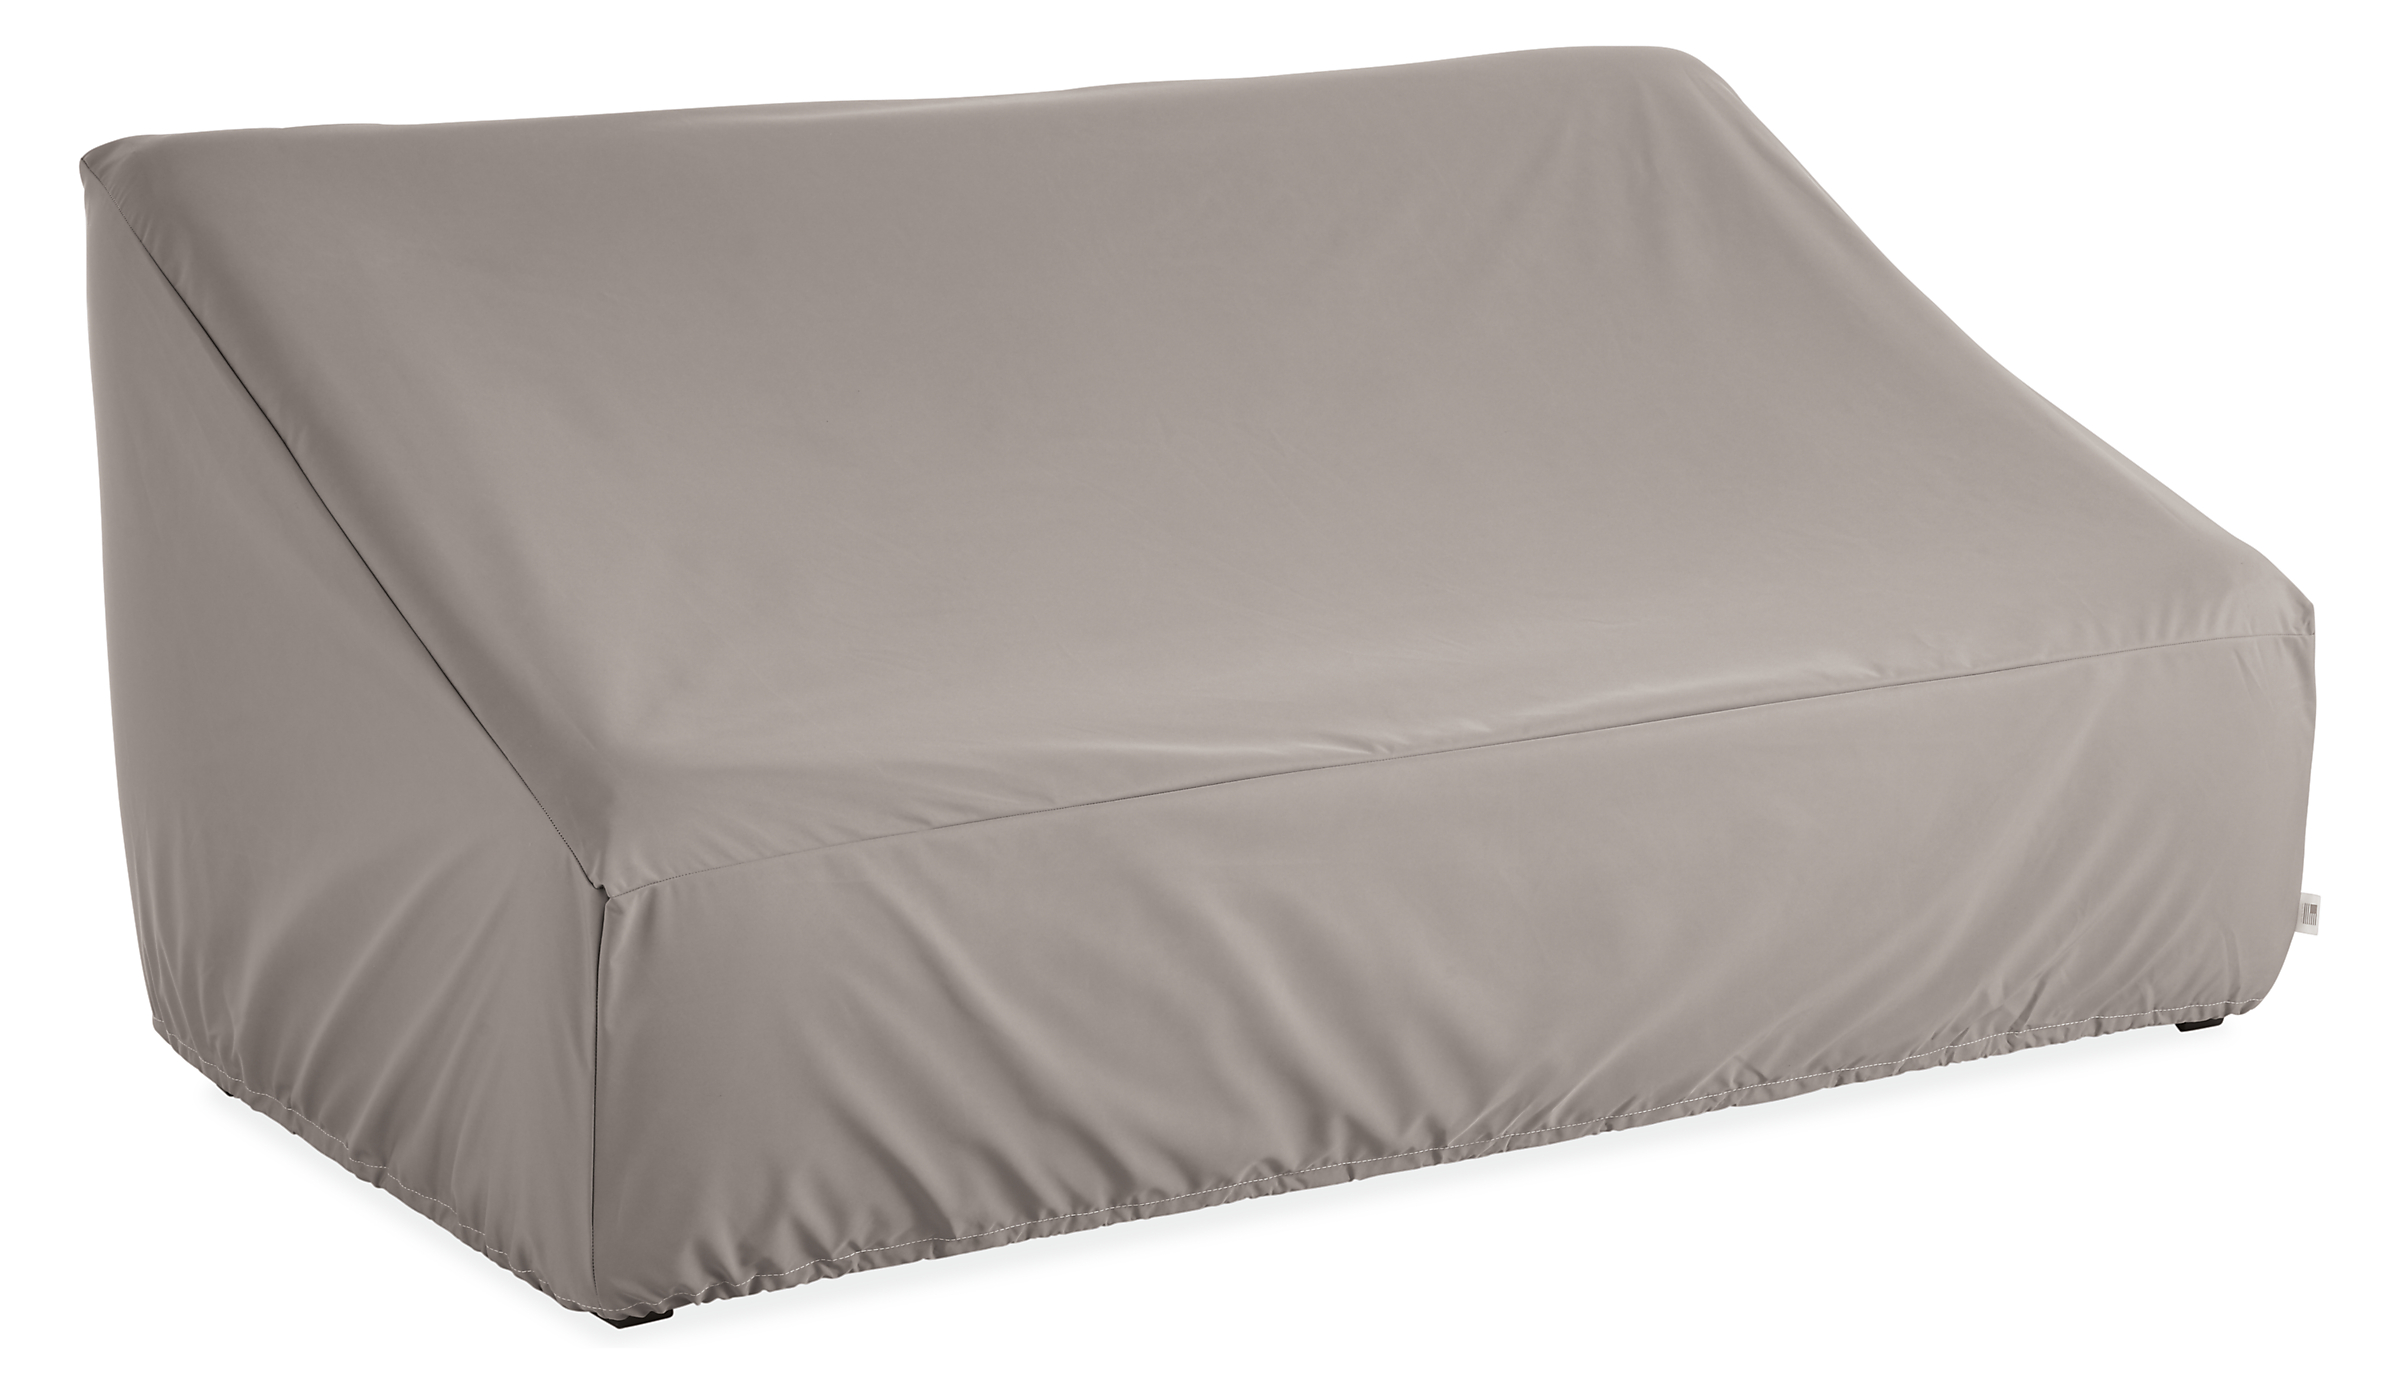 Outdoor Cover for Sofa 81w 35d 29h with Drawstring